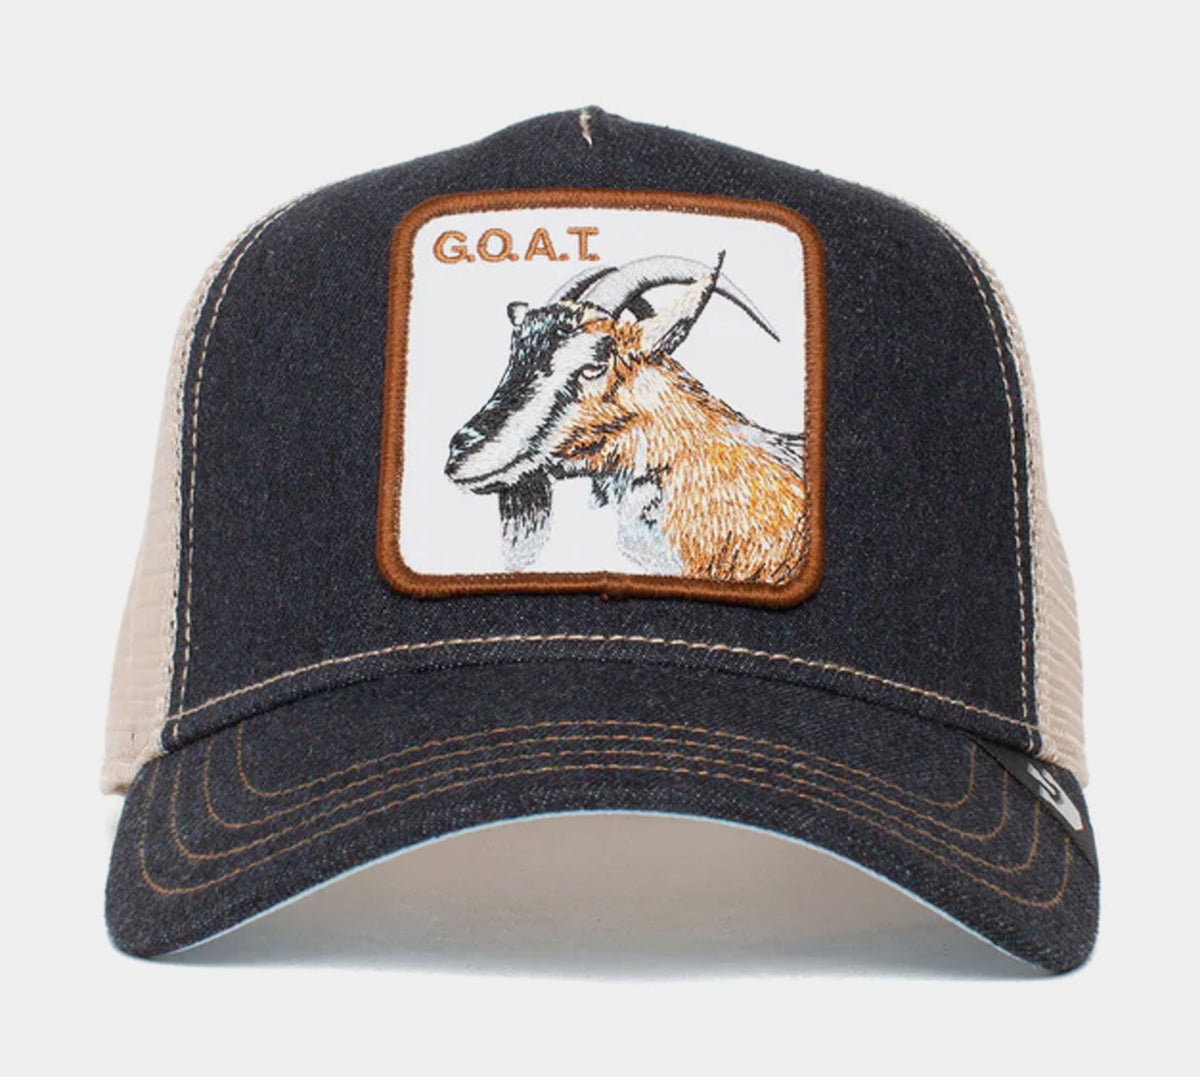 Goorin Bros The Goat Trucker Mens Hat Red White 101-0385-RED – Shoe Palace